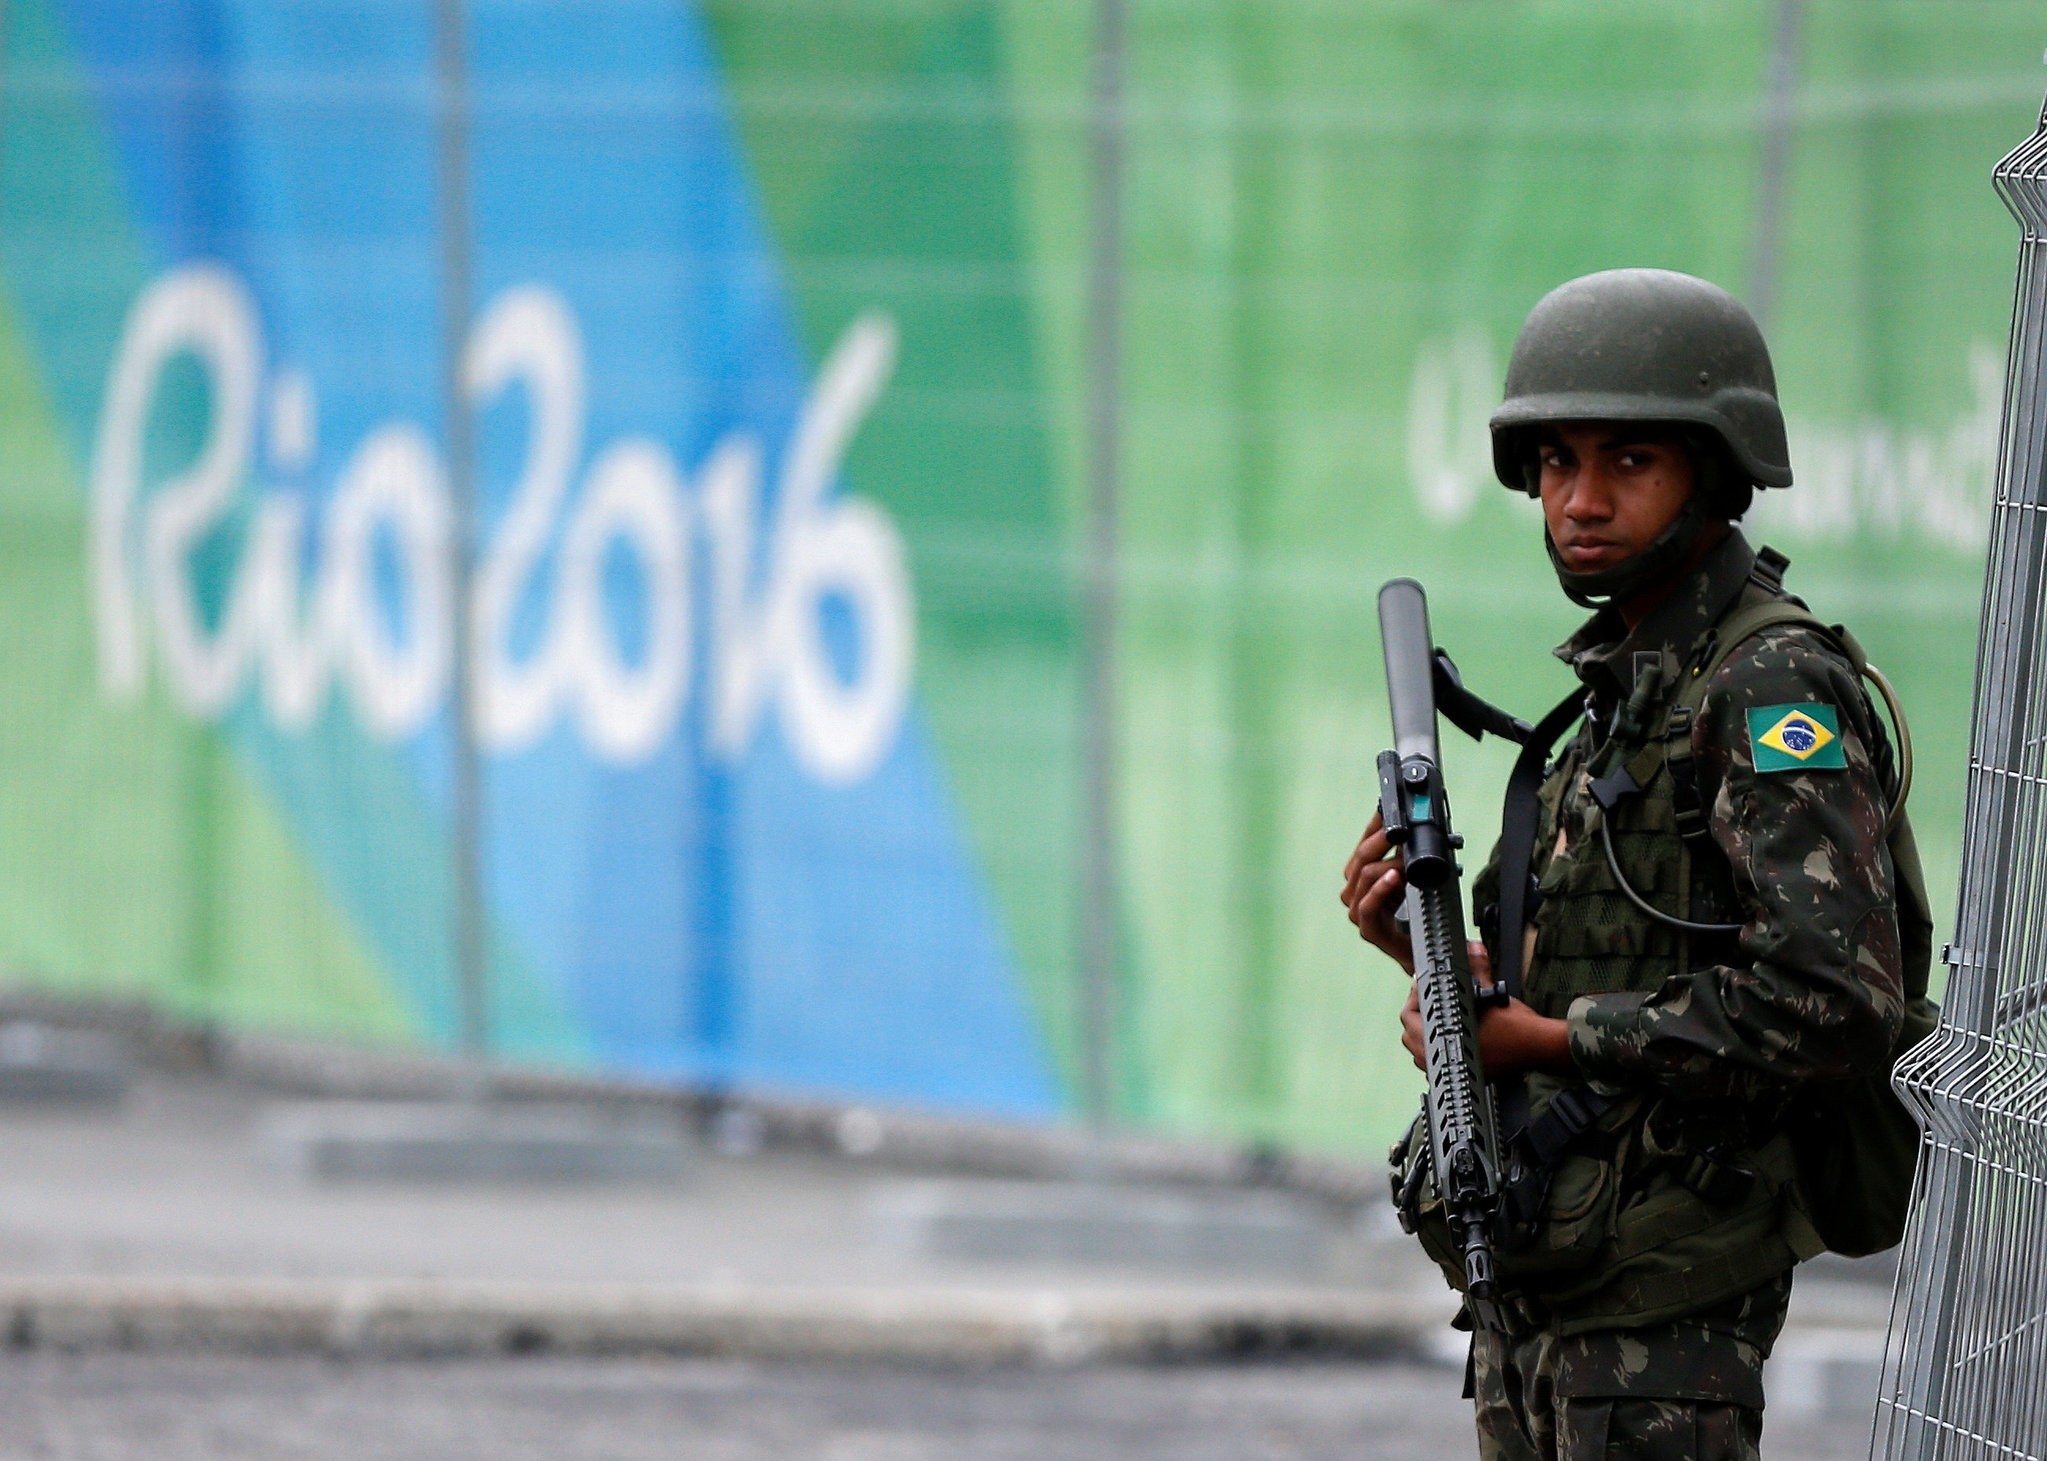 A soldier of the Brazilian Armed Forces stands guard outside the 2016 Rio Olympics Park in Rio de Janeiro, Brazil, July 21, 2016. (REUTERS Photo)